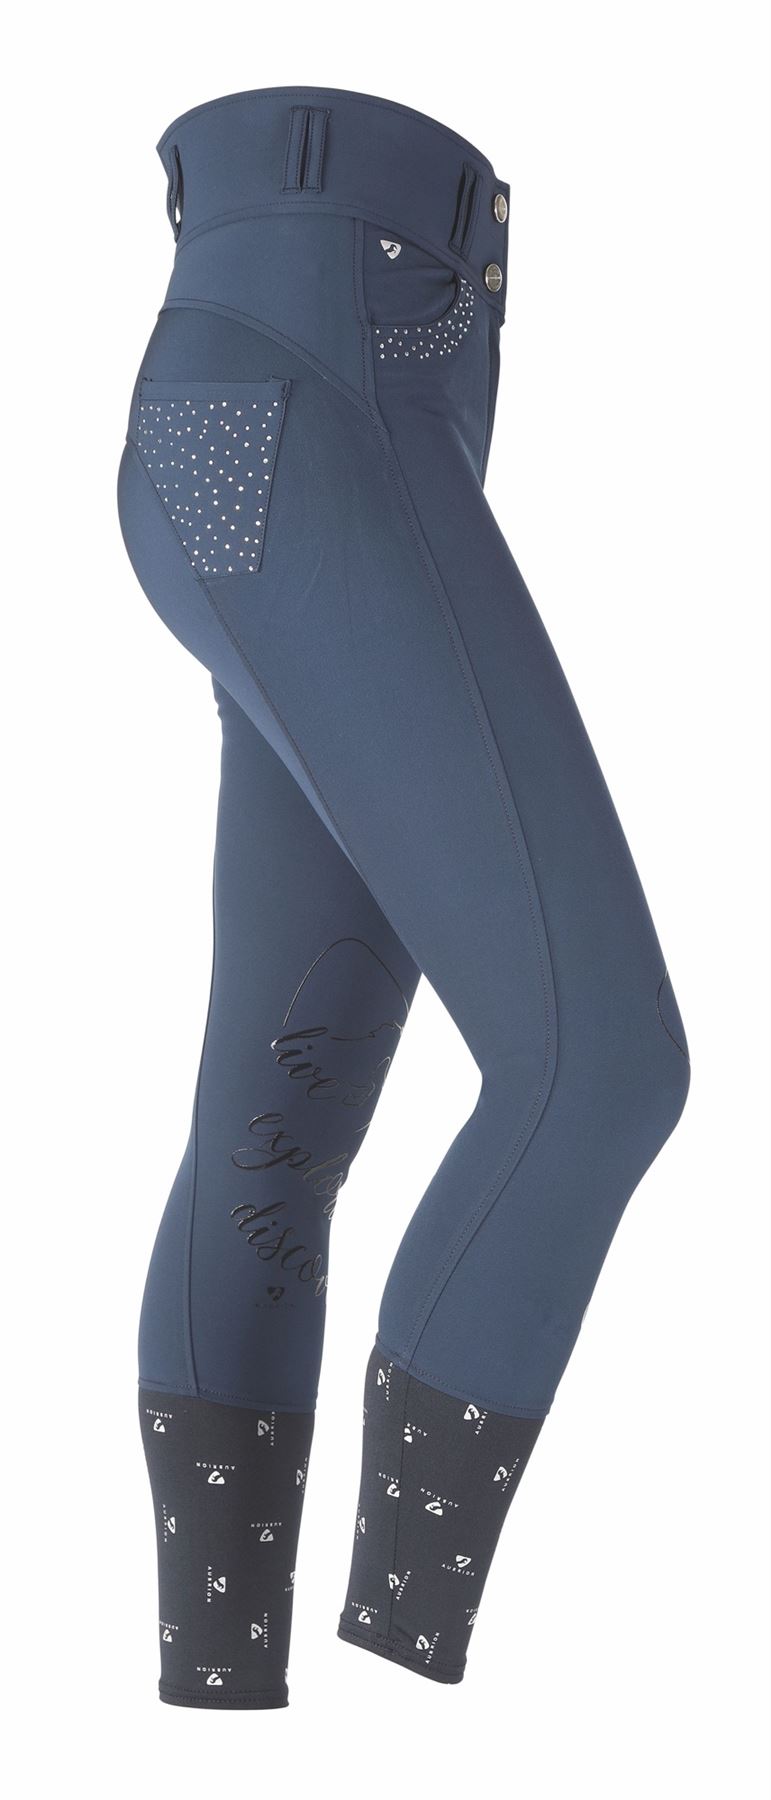 Shires Aubrion Queensway Breeches - Maids - Just Horse Riders